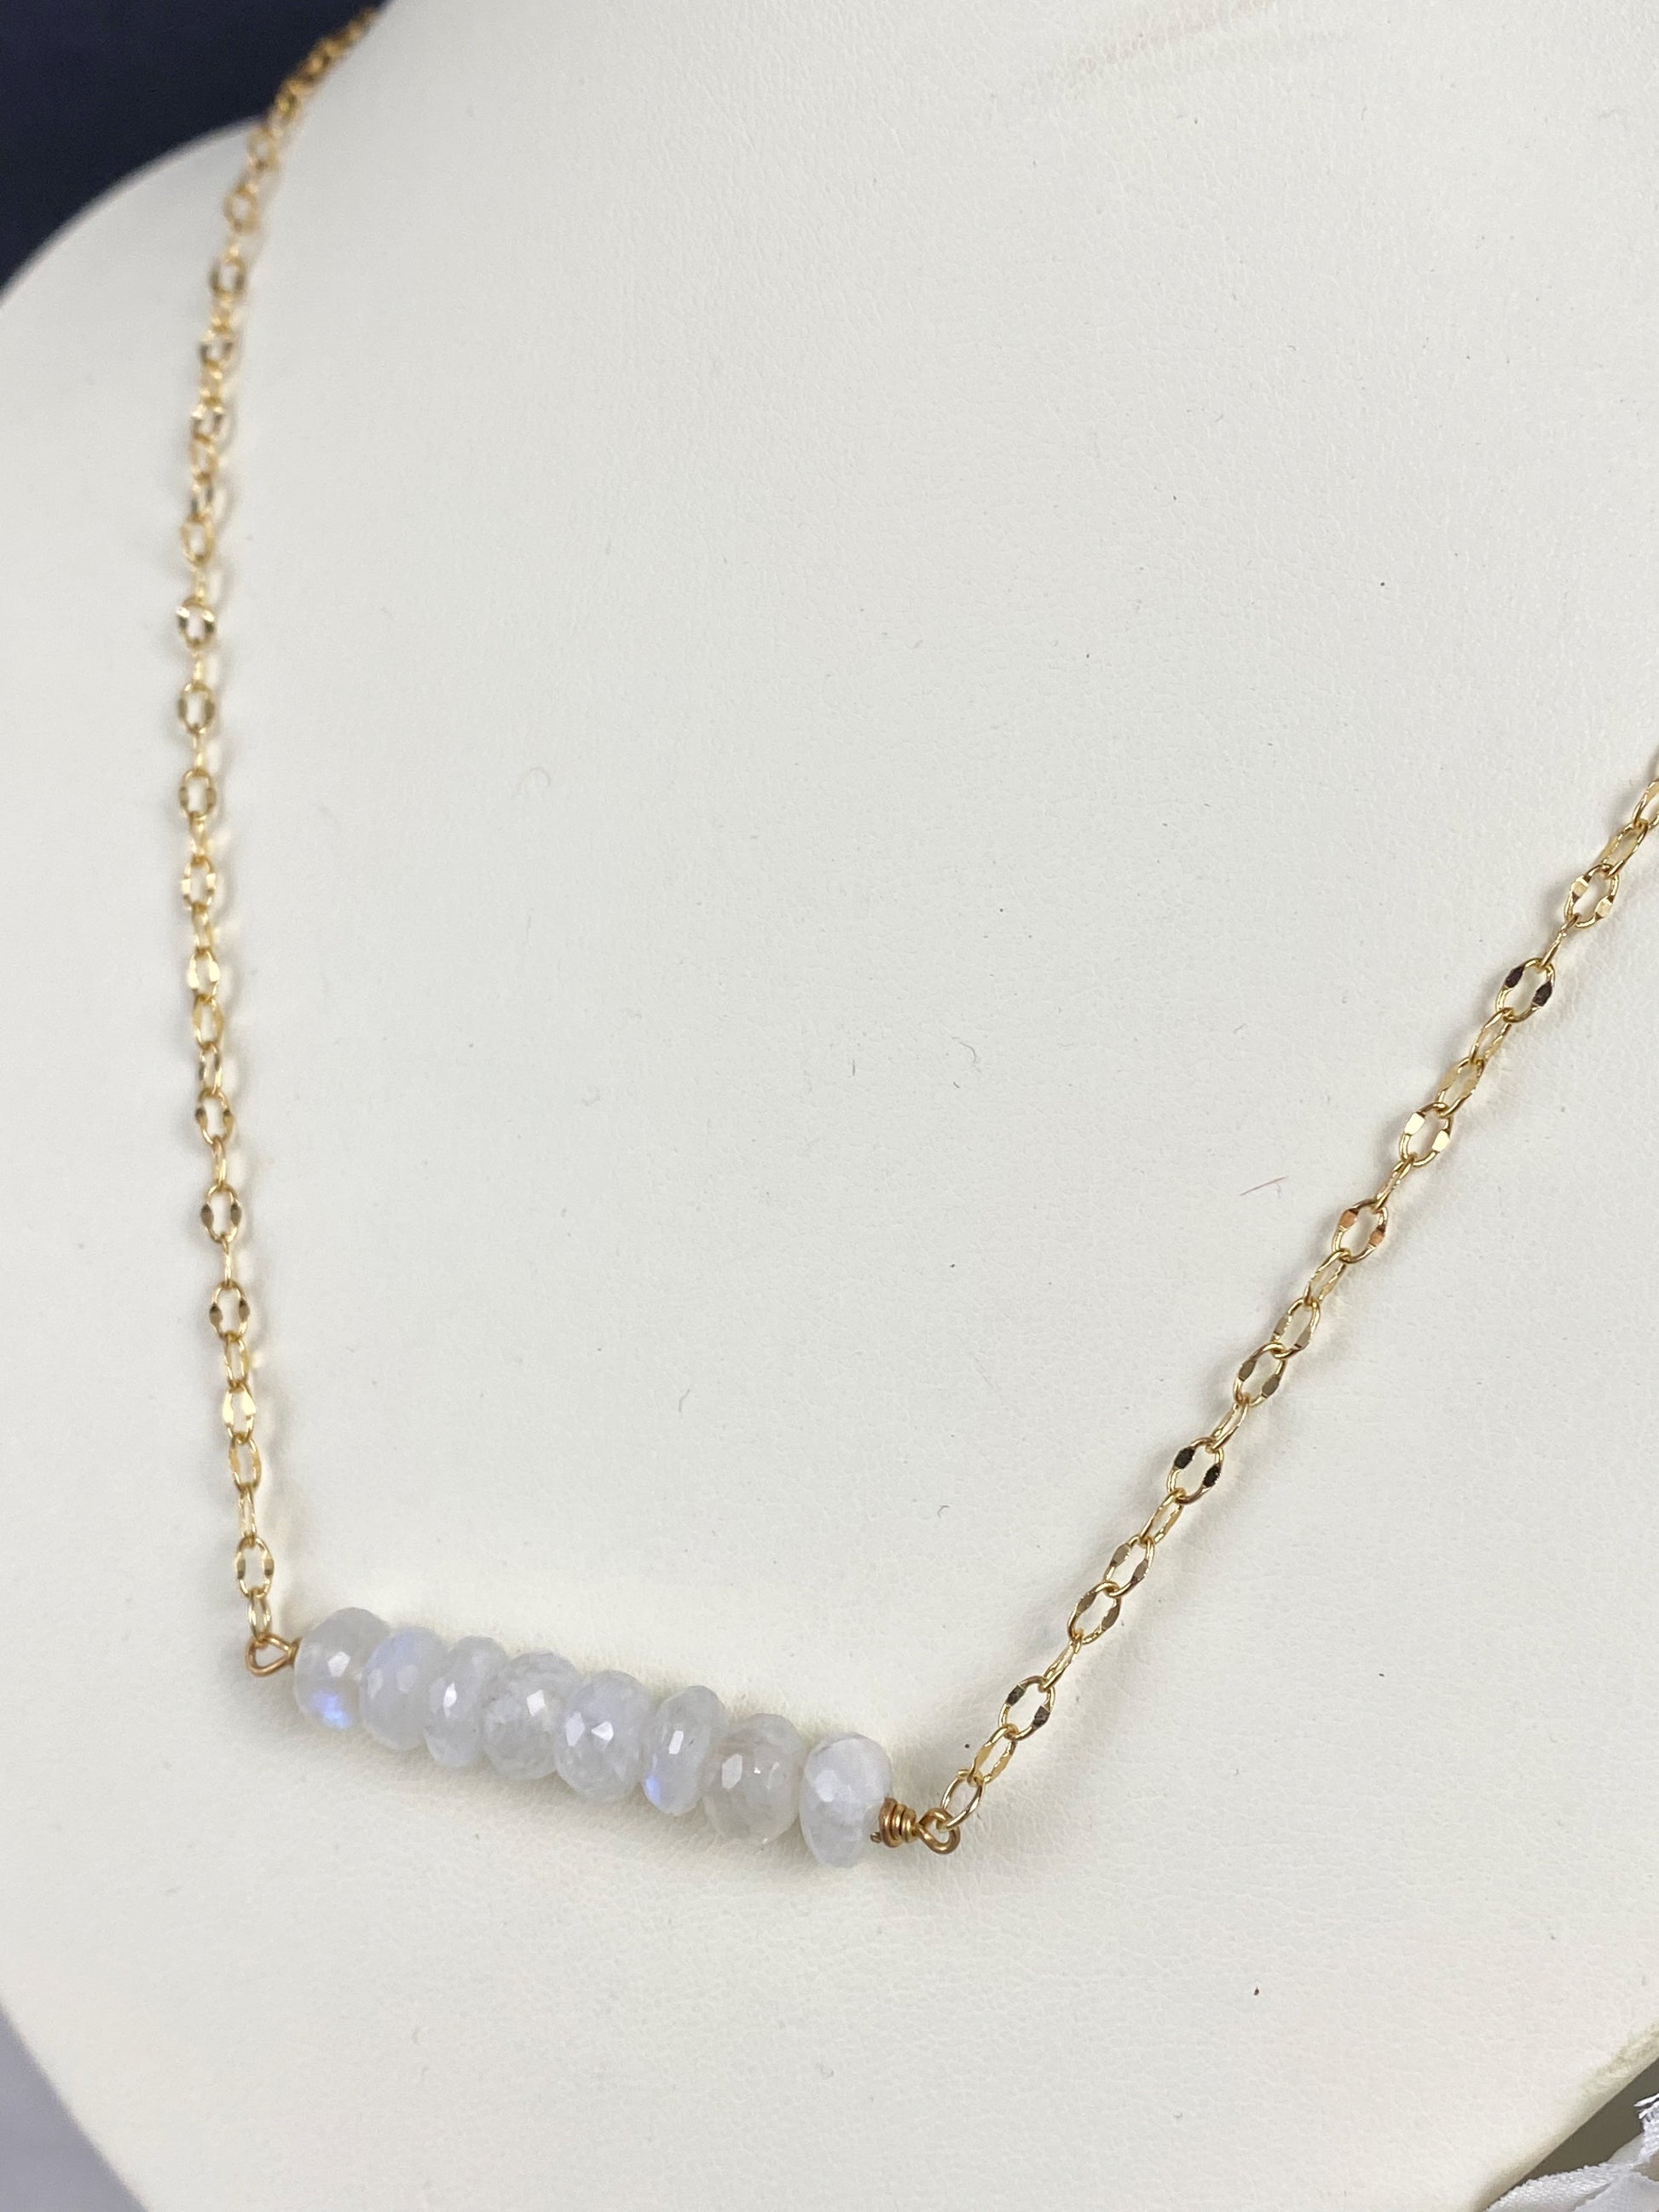 Moonstone pendant bar, gold necklace, jewelry - Andria Bieber Designs 